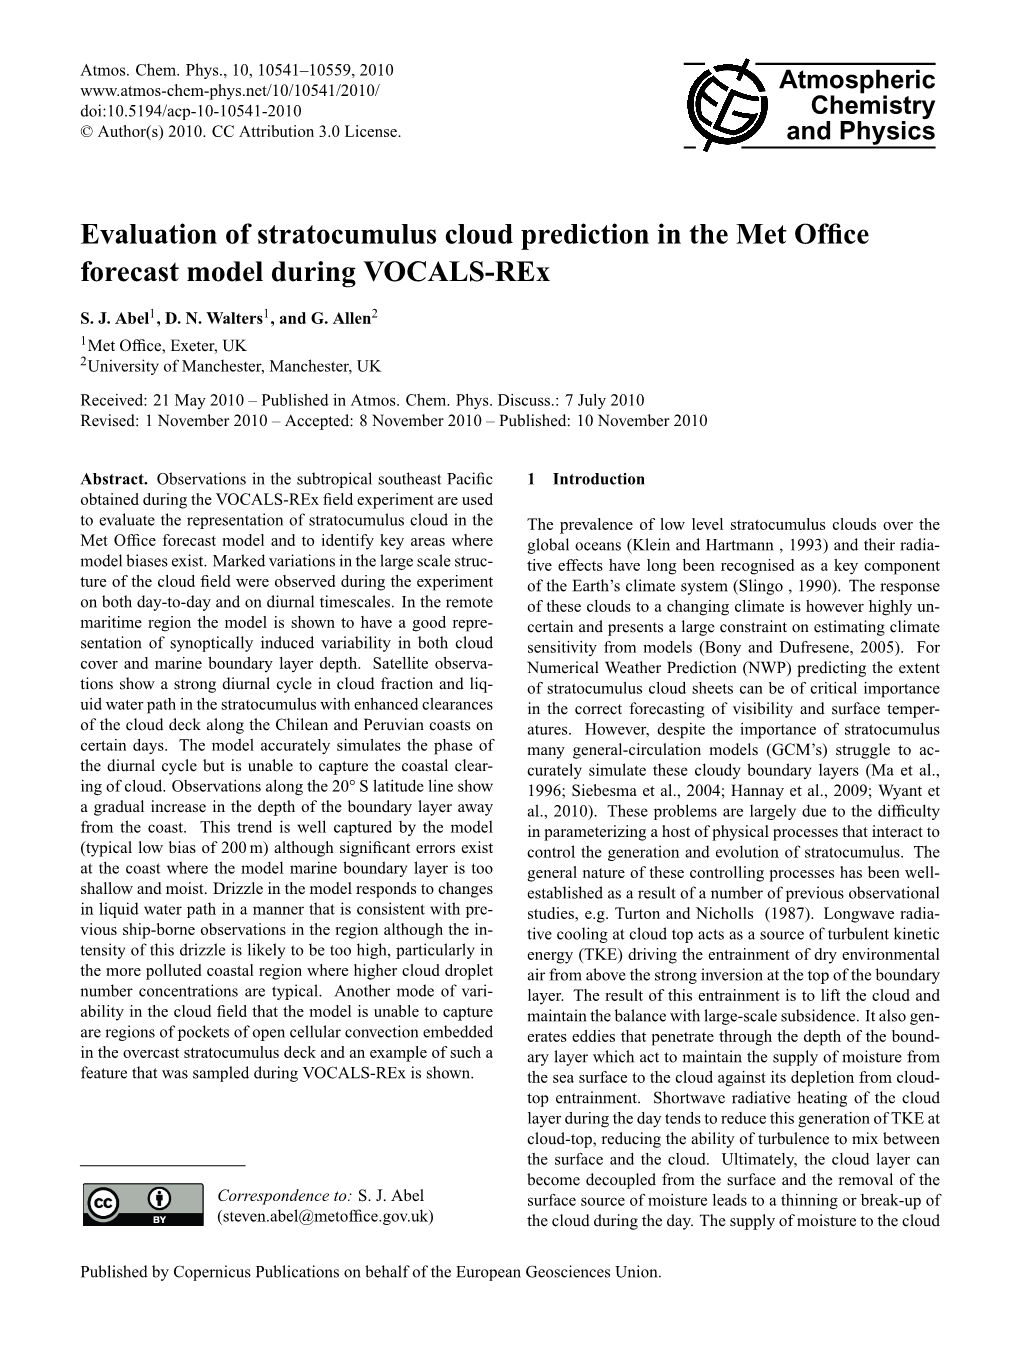 Evaluation of Stratocumulus Cloud Prediction in the Met Office Forecast Model During VOCALS-Rex